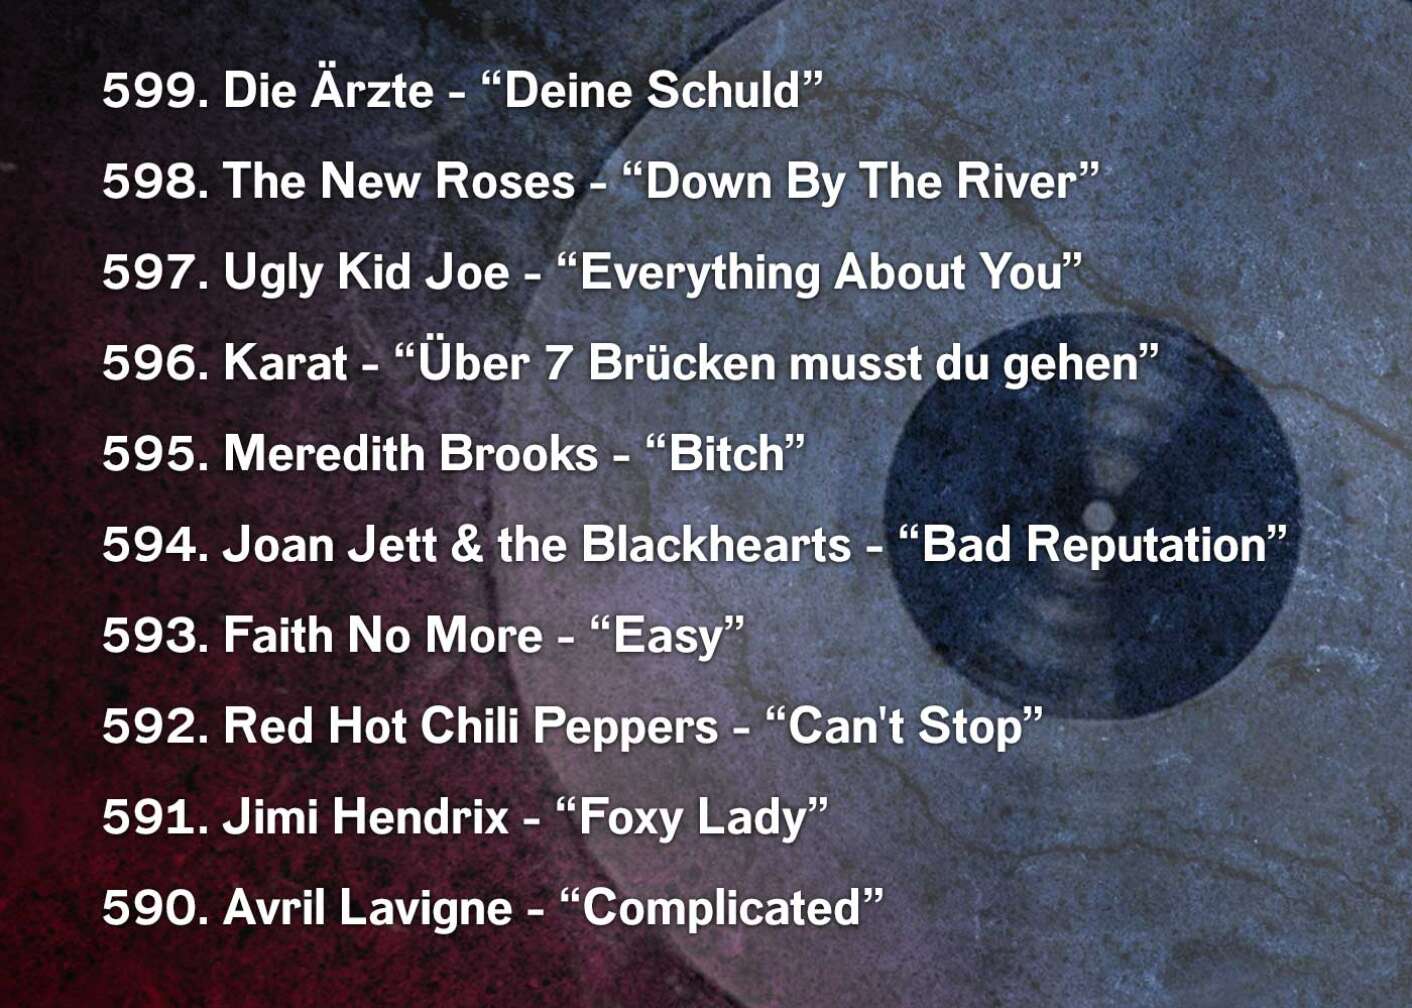 599. Die Ärzte - “Deine Schuld” 598. The New Roses - “Down By The River” 597. Ugly Kid Joe - “Everything About You” 596. Karat - “Über 7 Brücken musst du gehen” 595. Meredith Brooks - “Bitch” 594. Joan Jett & the Blackhearts - “Bad Reputation” 593. Faith No More - “Easy” 592. Red Hot Chili Peppers - “Can't Stop” 591. Jimi Hendrix - “Foxy Lady” 590. Avril Lavigne - “Complicated”